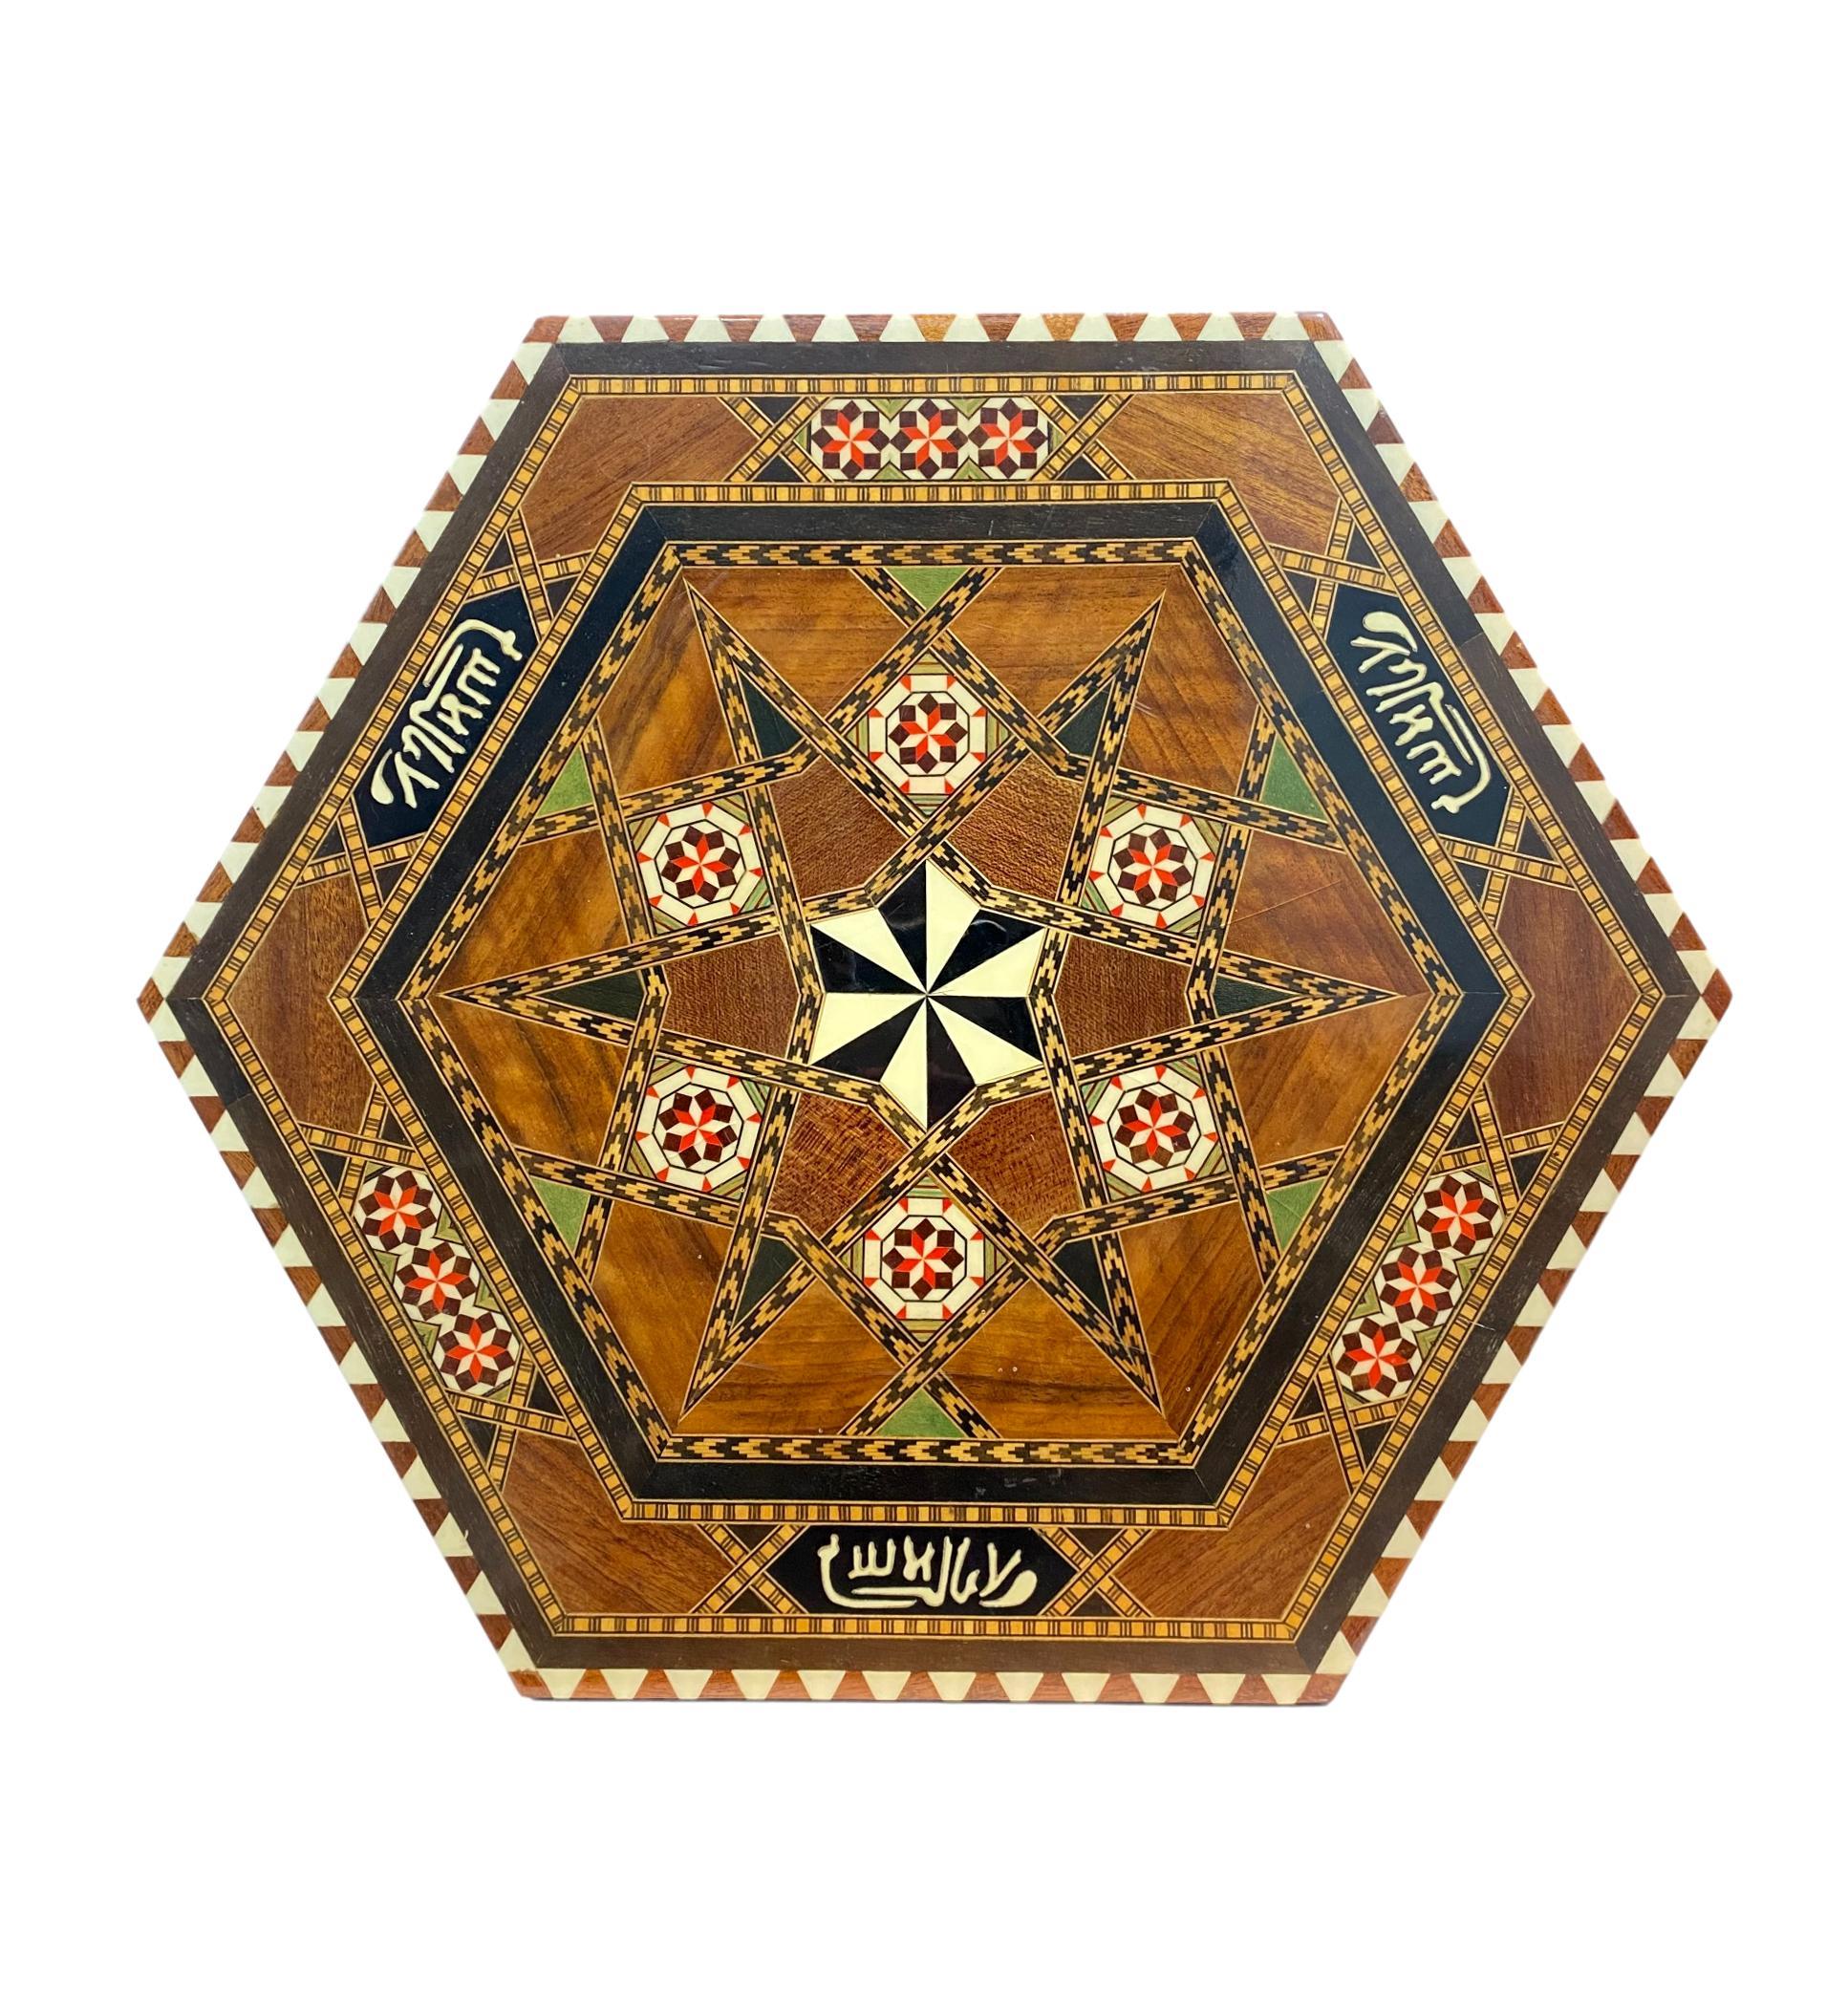 Late 20th Century Syrian Hexagonal Table/Stand with Profuse and Exotic Detailed Inlays